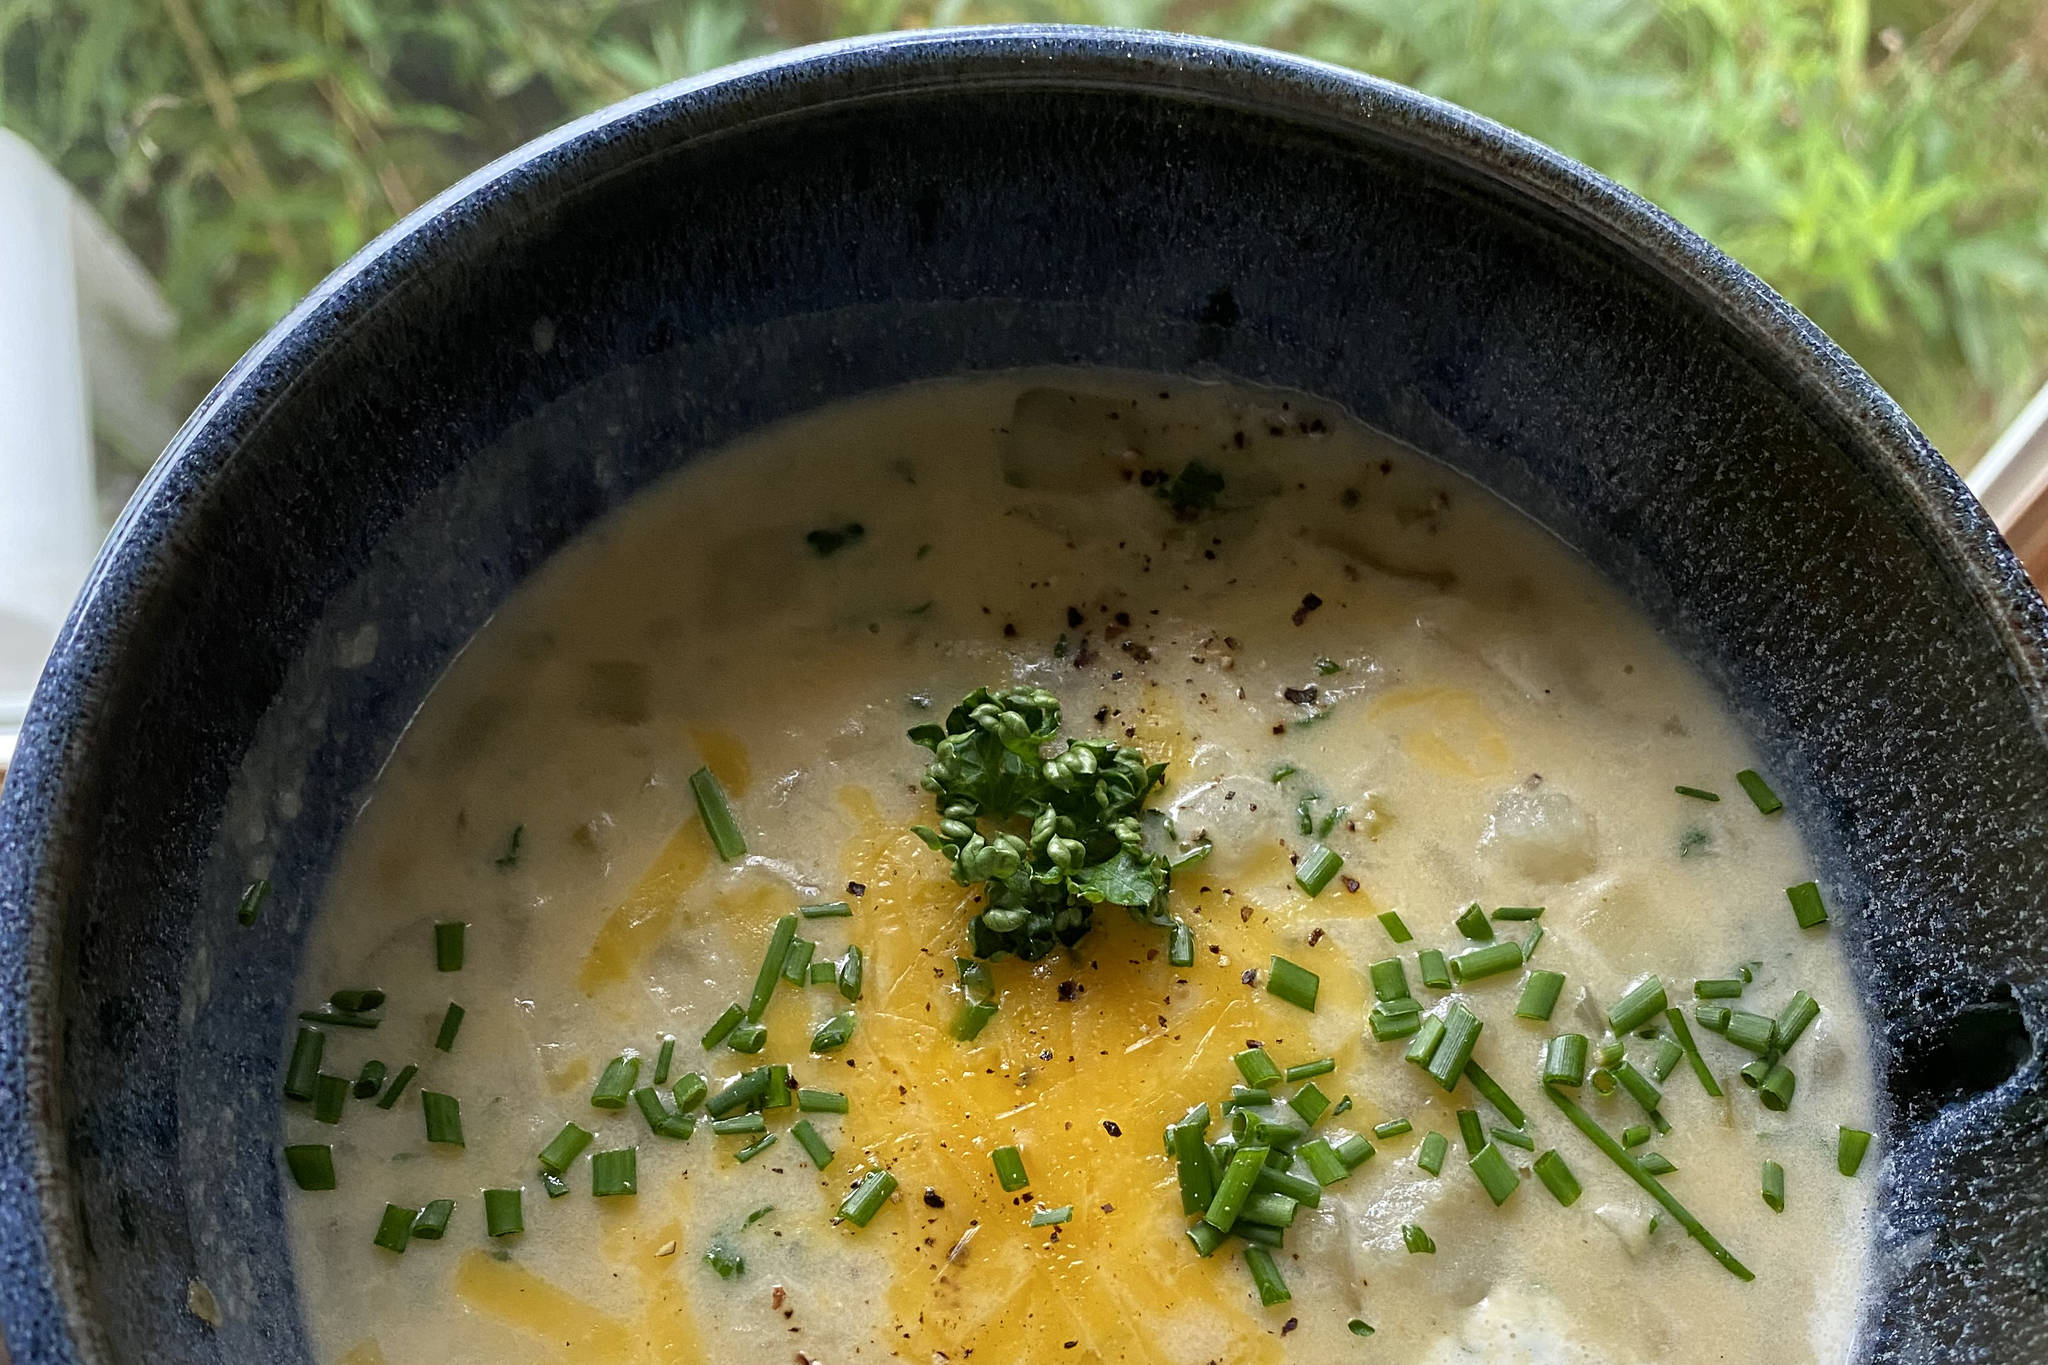 This potato corn chowder takes 10 minutes to prepare and can be customized with different toppings to satisfy everyone at the table. (Photo by Tressa Dale/Peninsula Clarion)